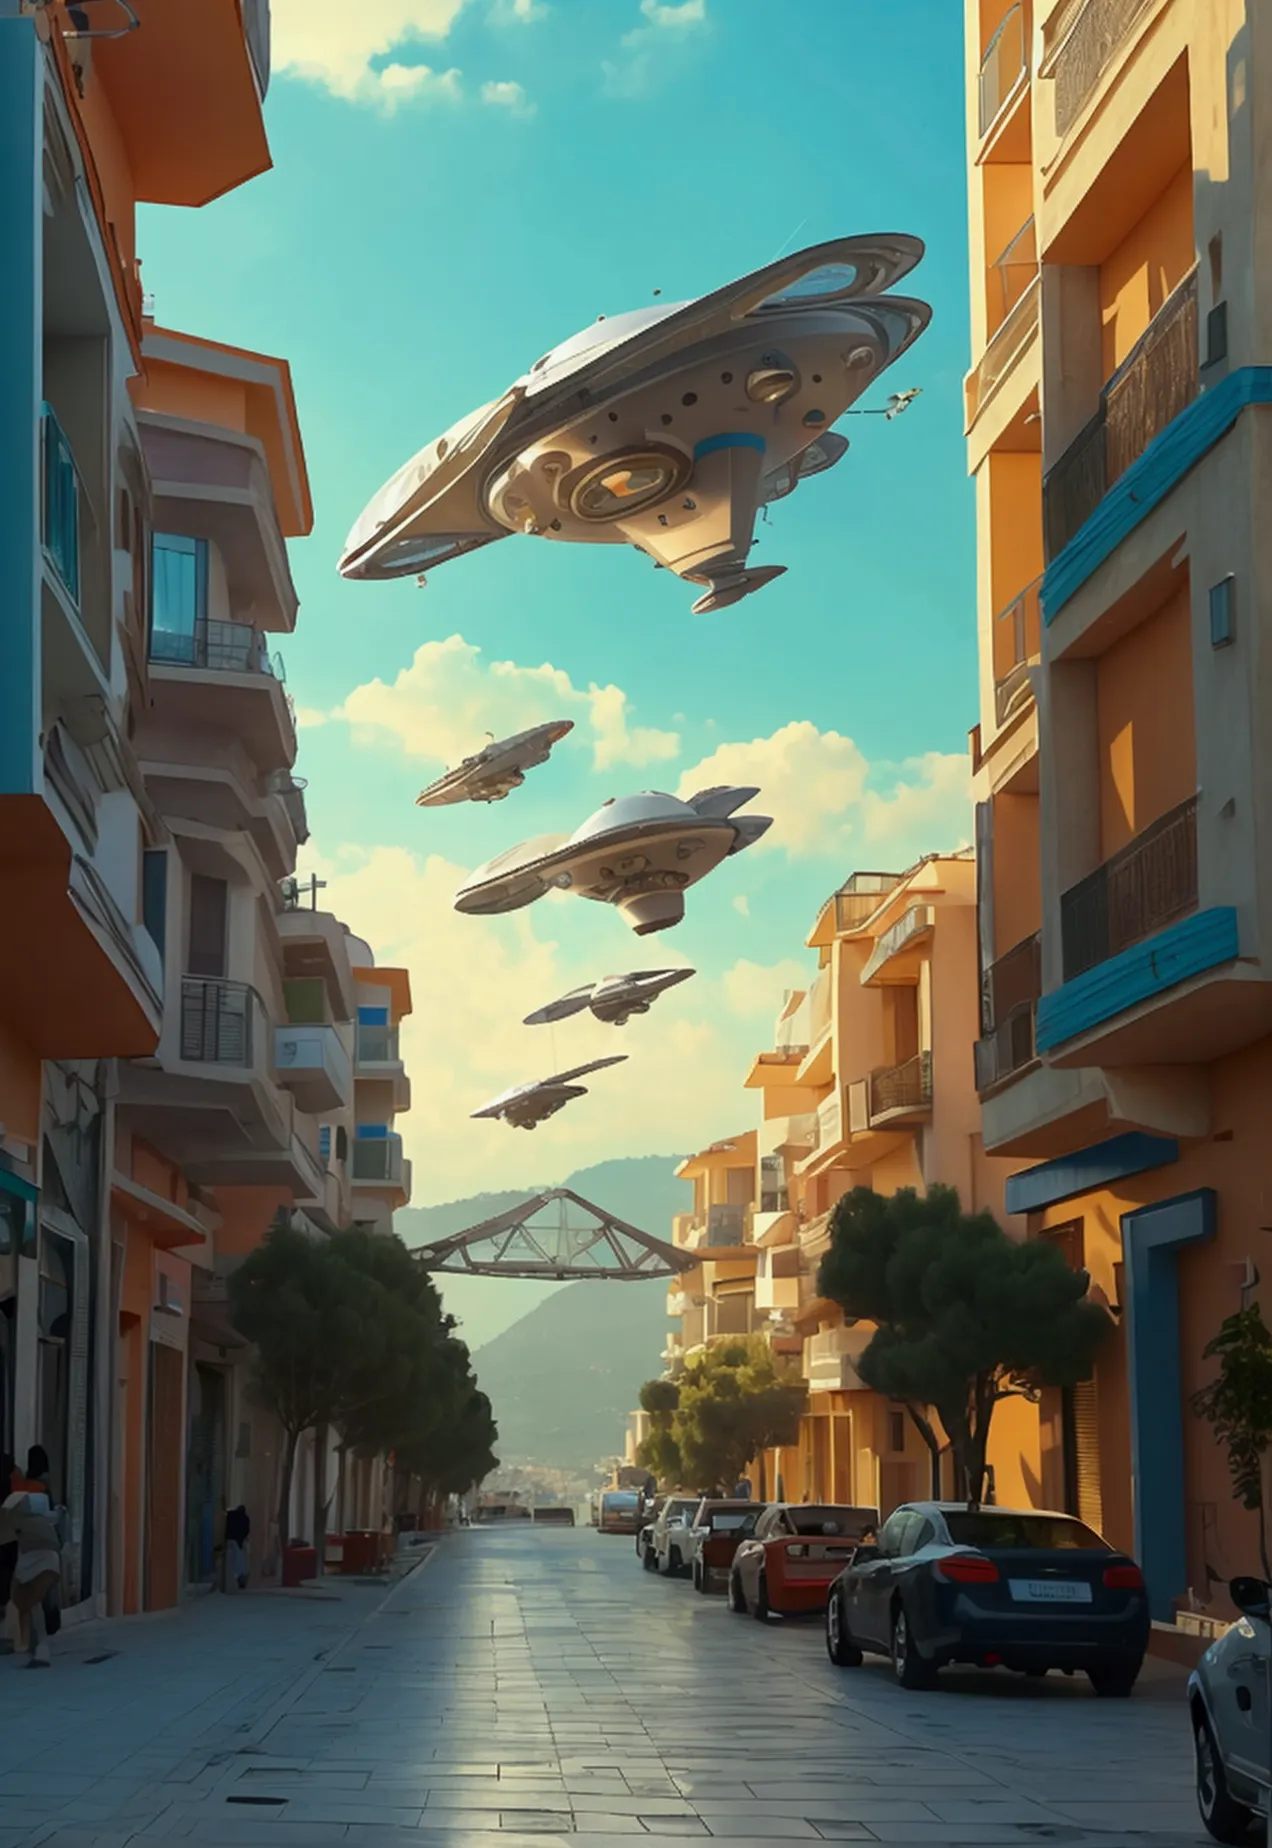 Spacecraft flying in the sky over Alanya district of Antalya, walking on the streets in 2050